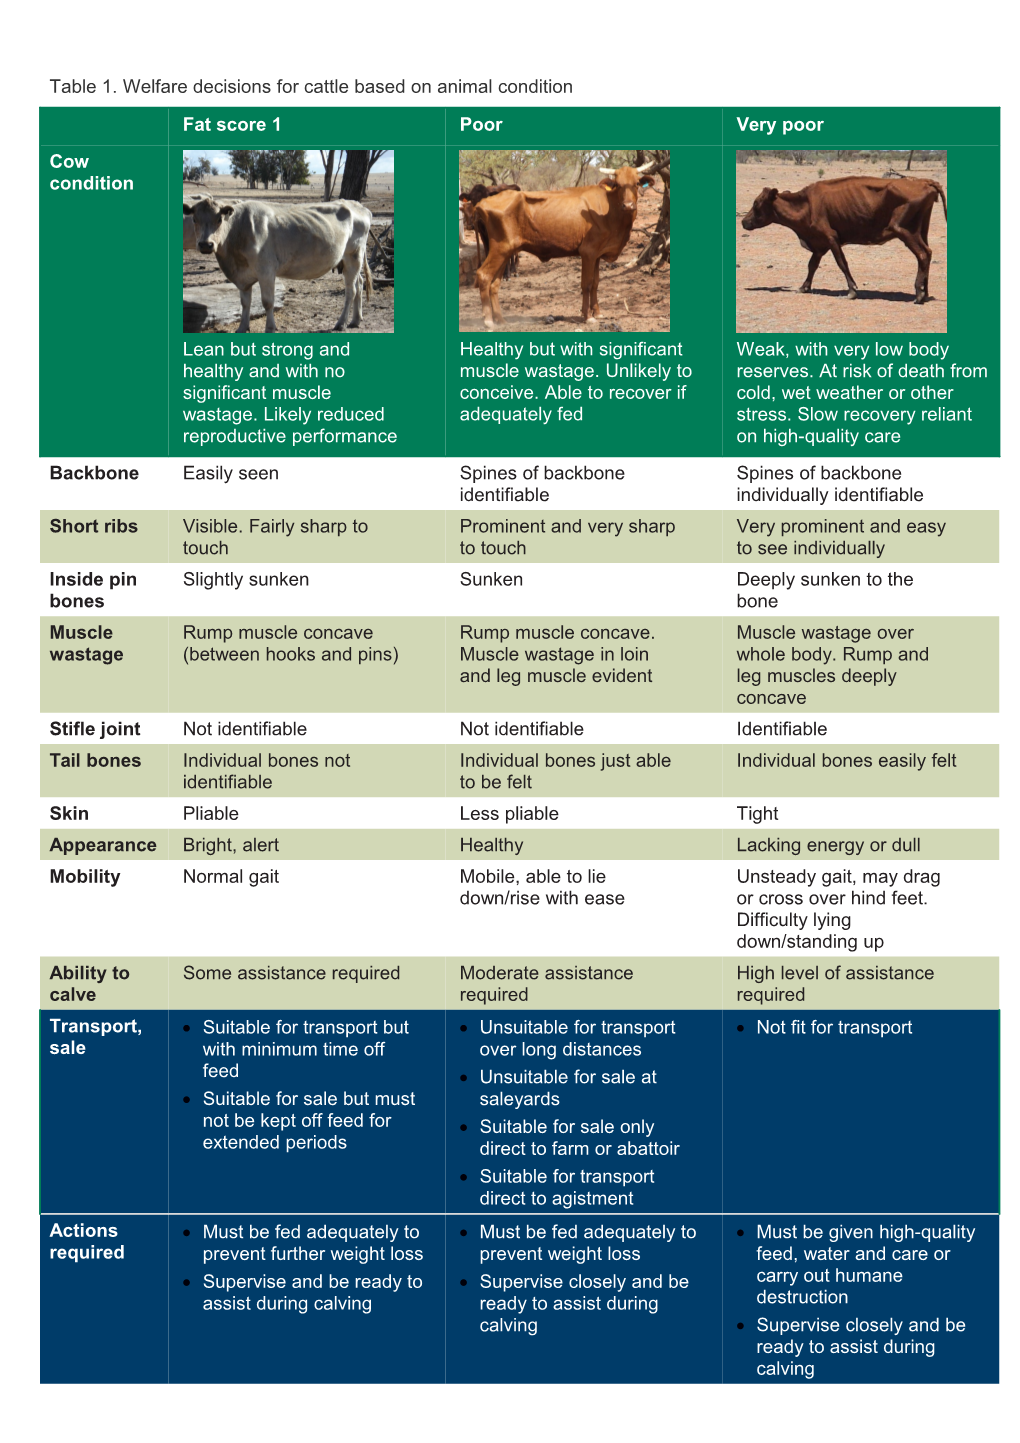 Welfare Decisions for Beef Cattle